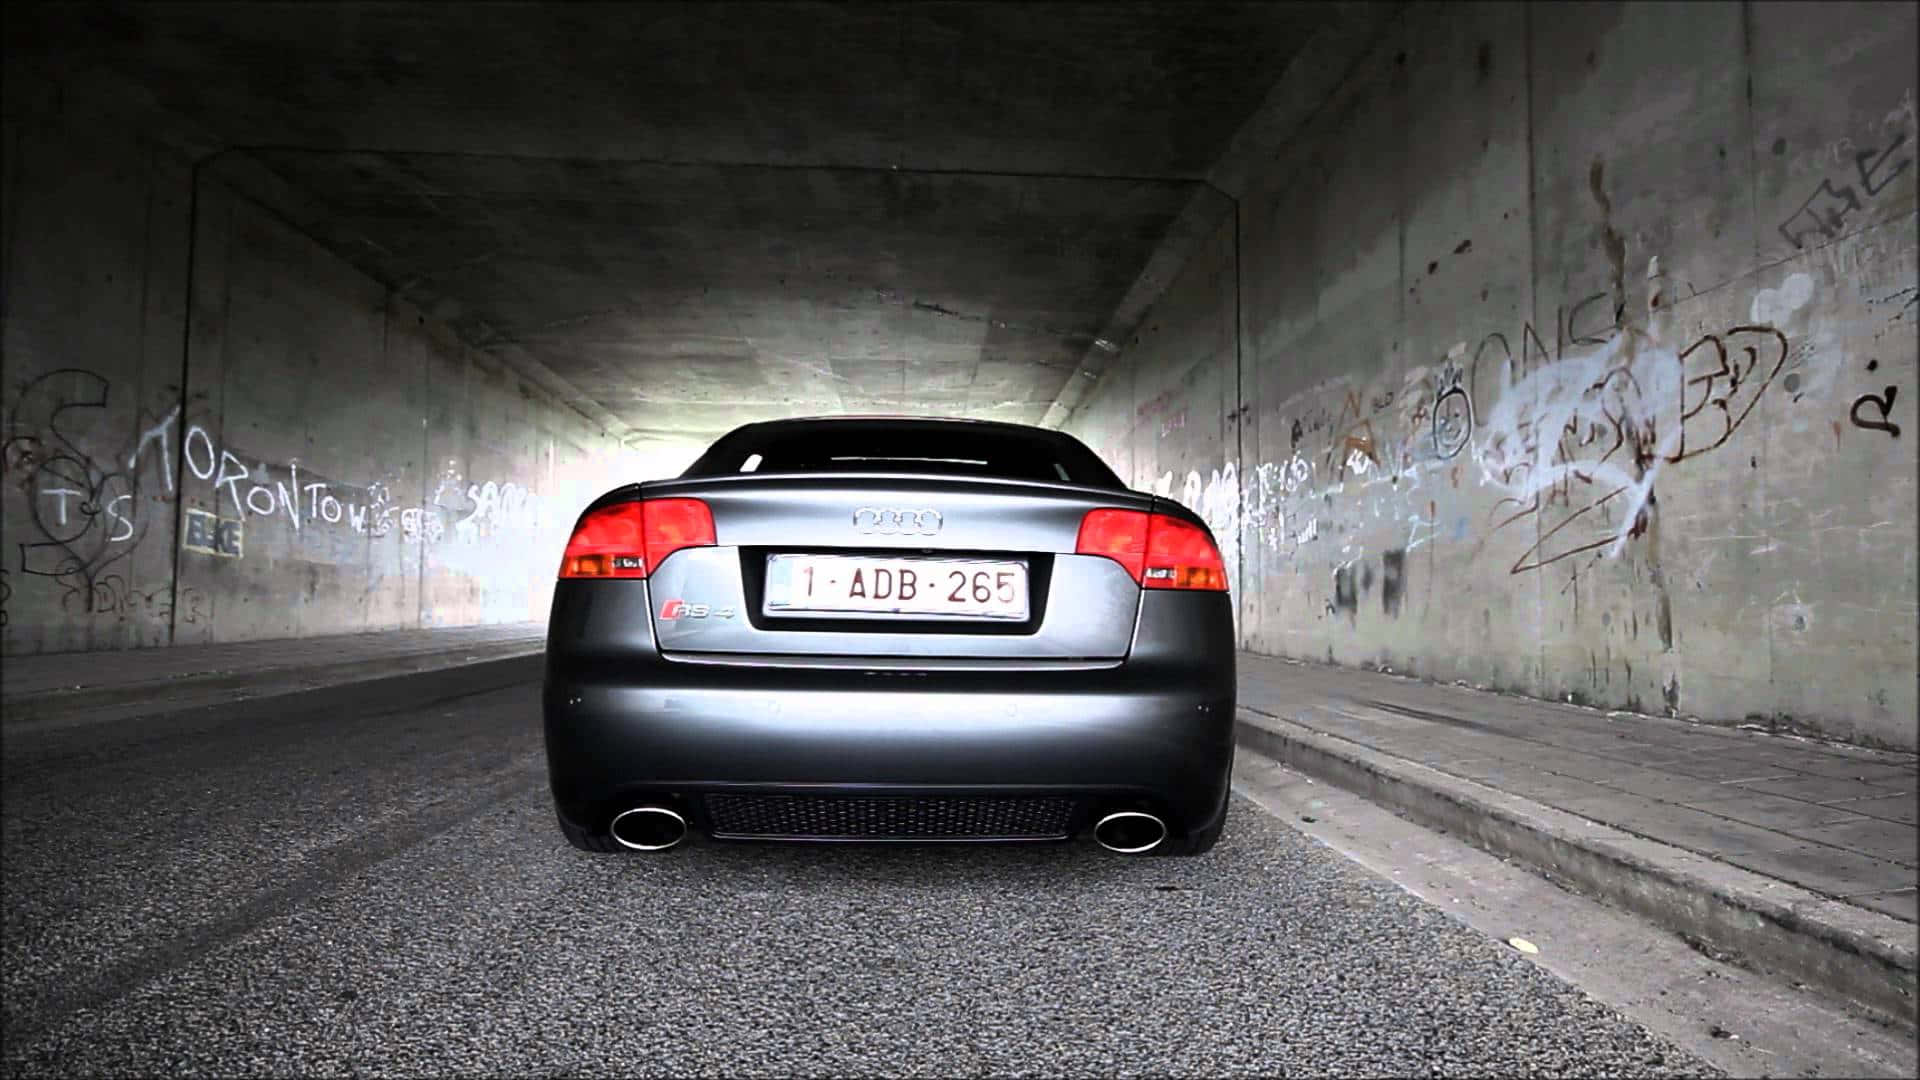 Stunning Audi RS4 in Action Wallpaper